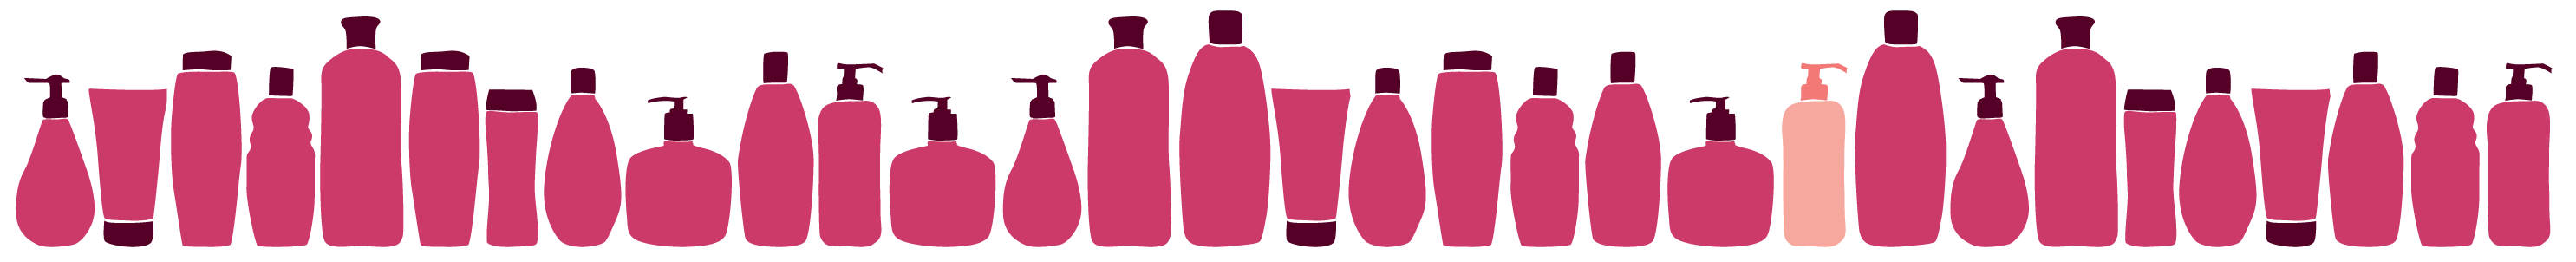 30 red bottles and 1 pink bottle showing only 1 in 31 products studied had its chemicals of  concern disclosed on the label